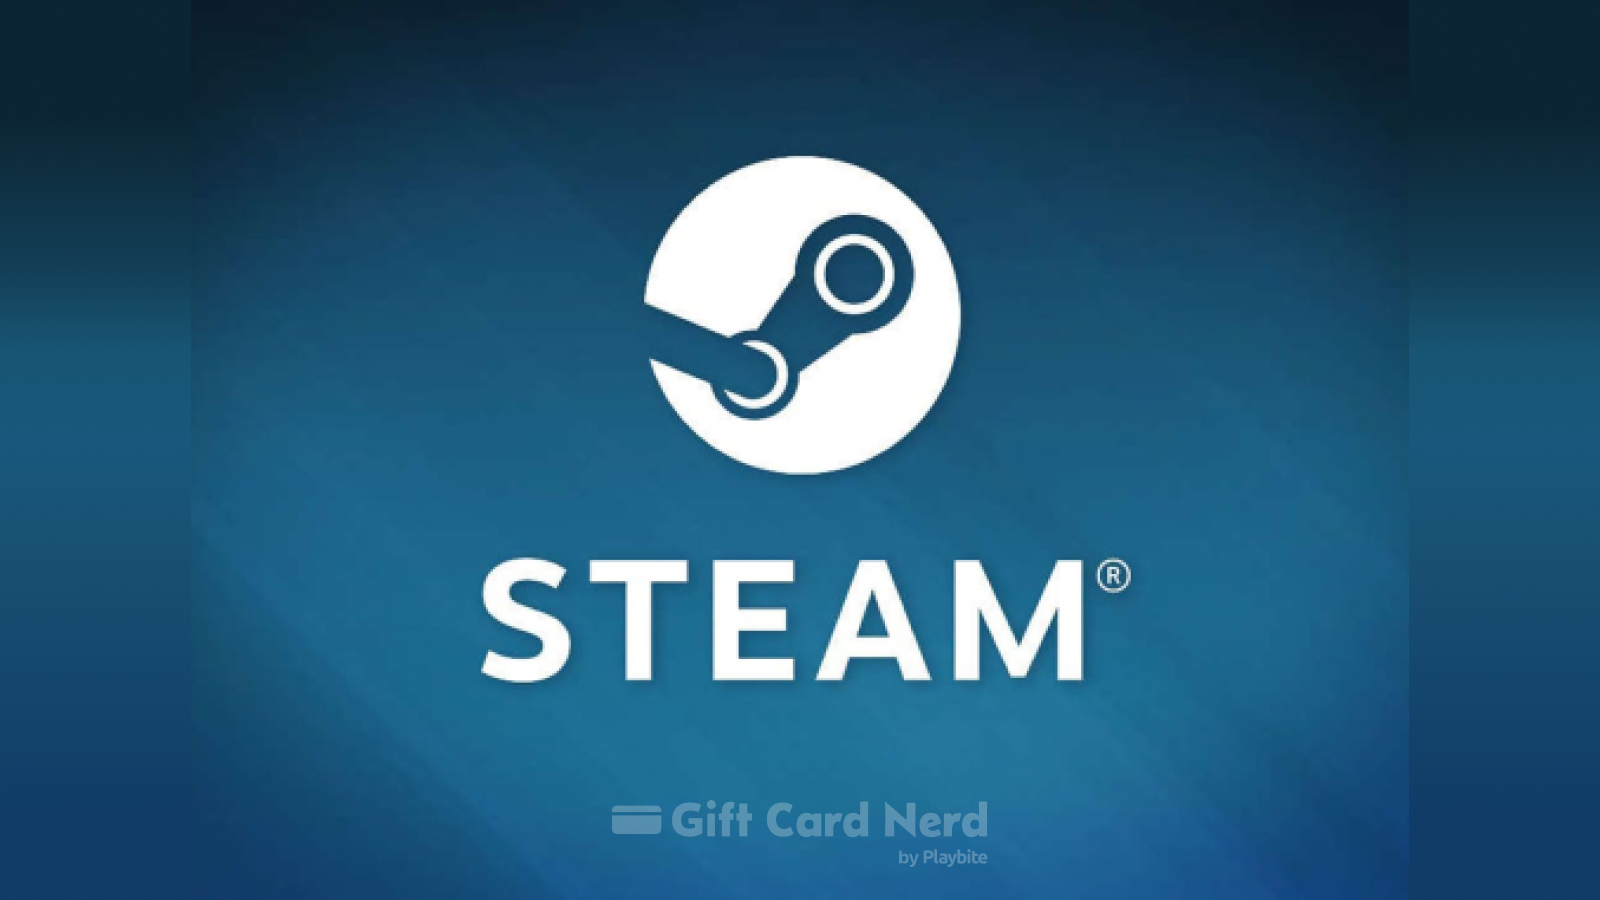 Does Amazon Sell Steam Gift Cards?